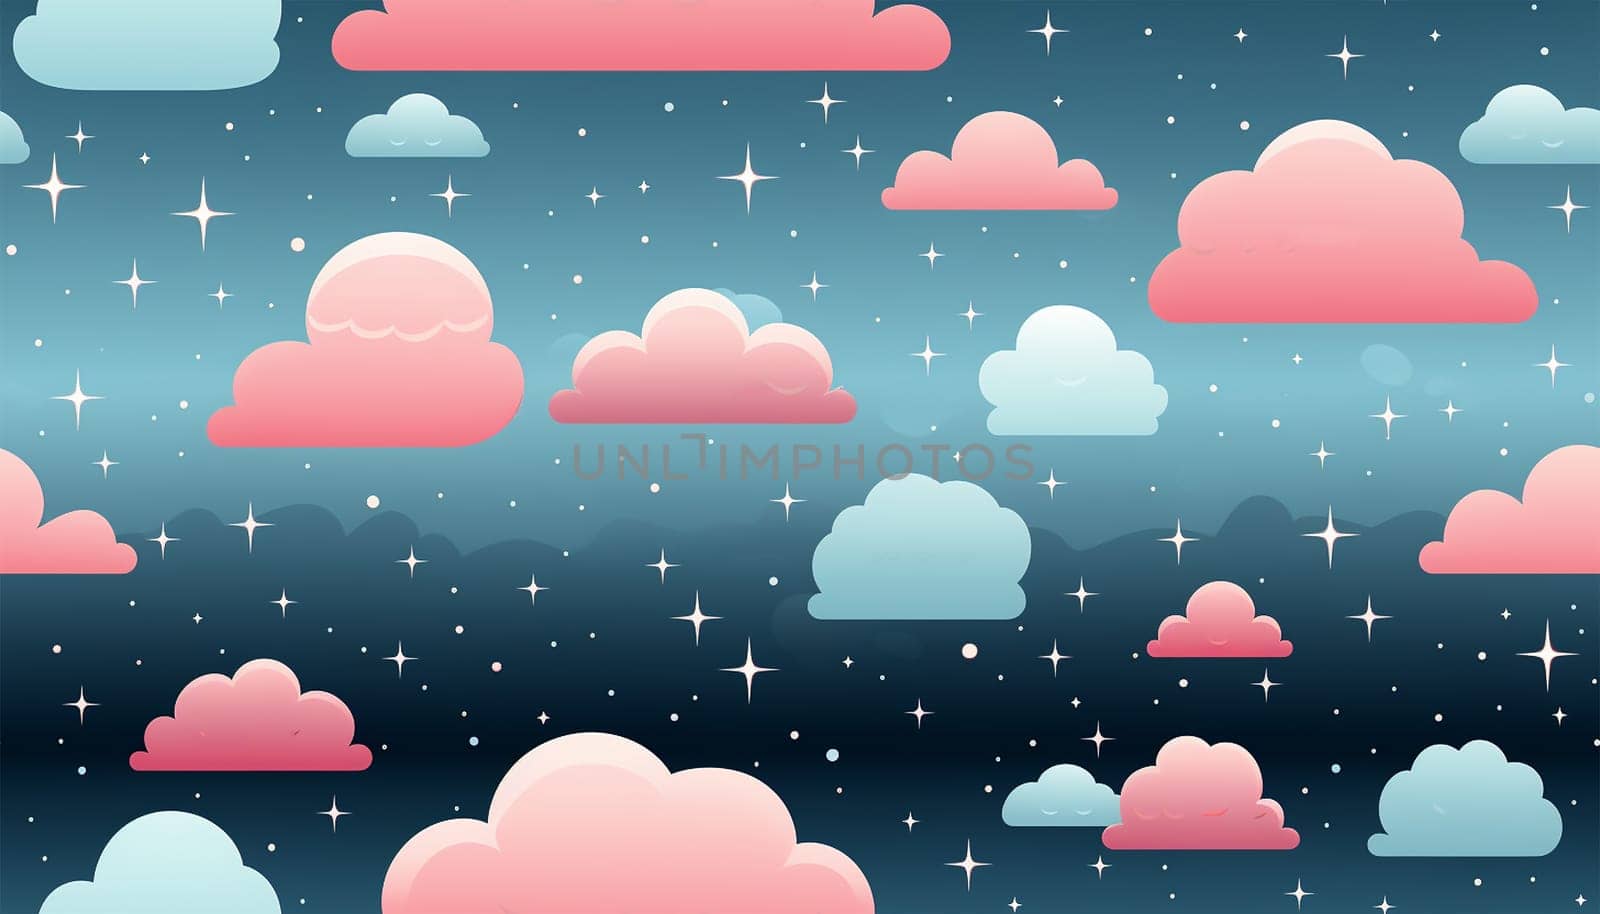 Cute colorful pastel clouds seamless pattern background. Rainbow unicorn background with clouds and stars. Pastel color sky. Magical landscape, abstract fabulous pattern. Cute candy wallpaper. by Annebel146